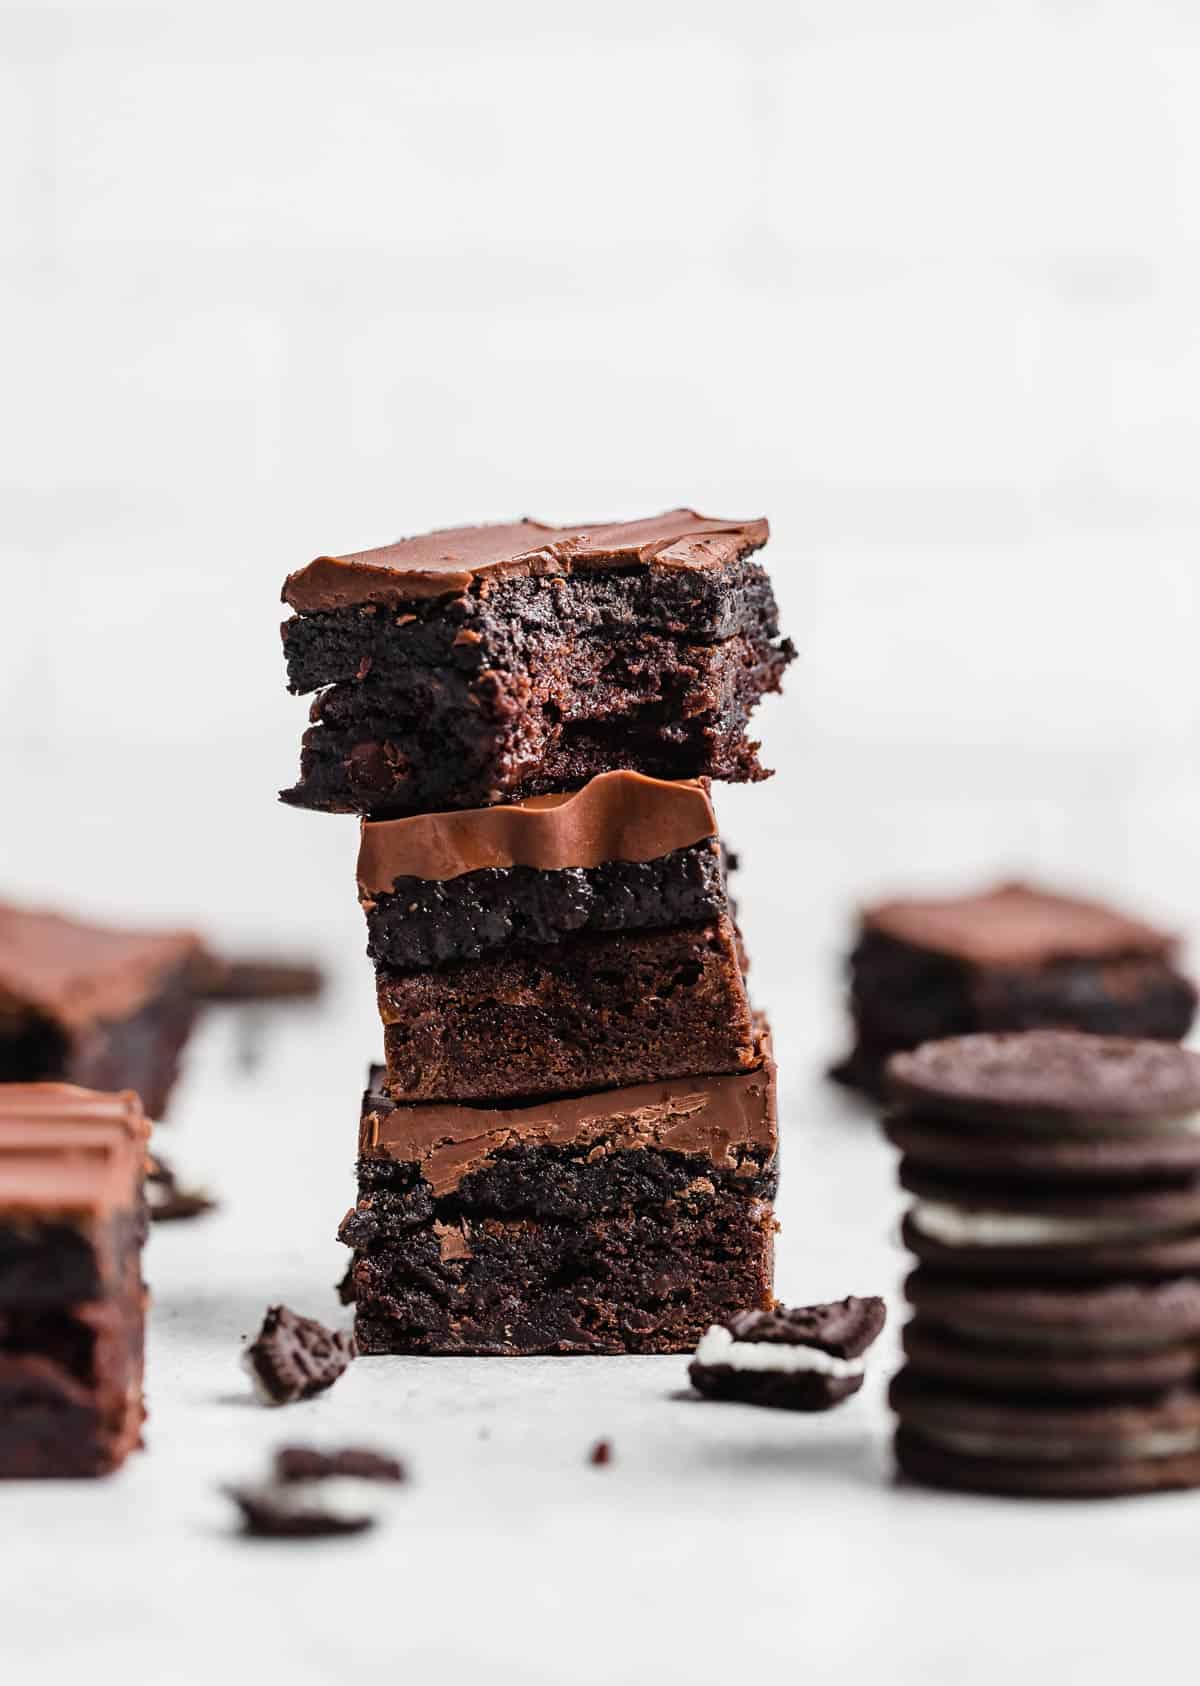 Three Oreo Truffle Brownies stacked on top of each other against a white background.